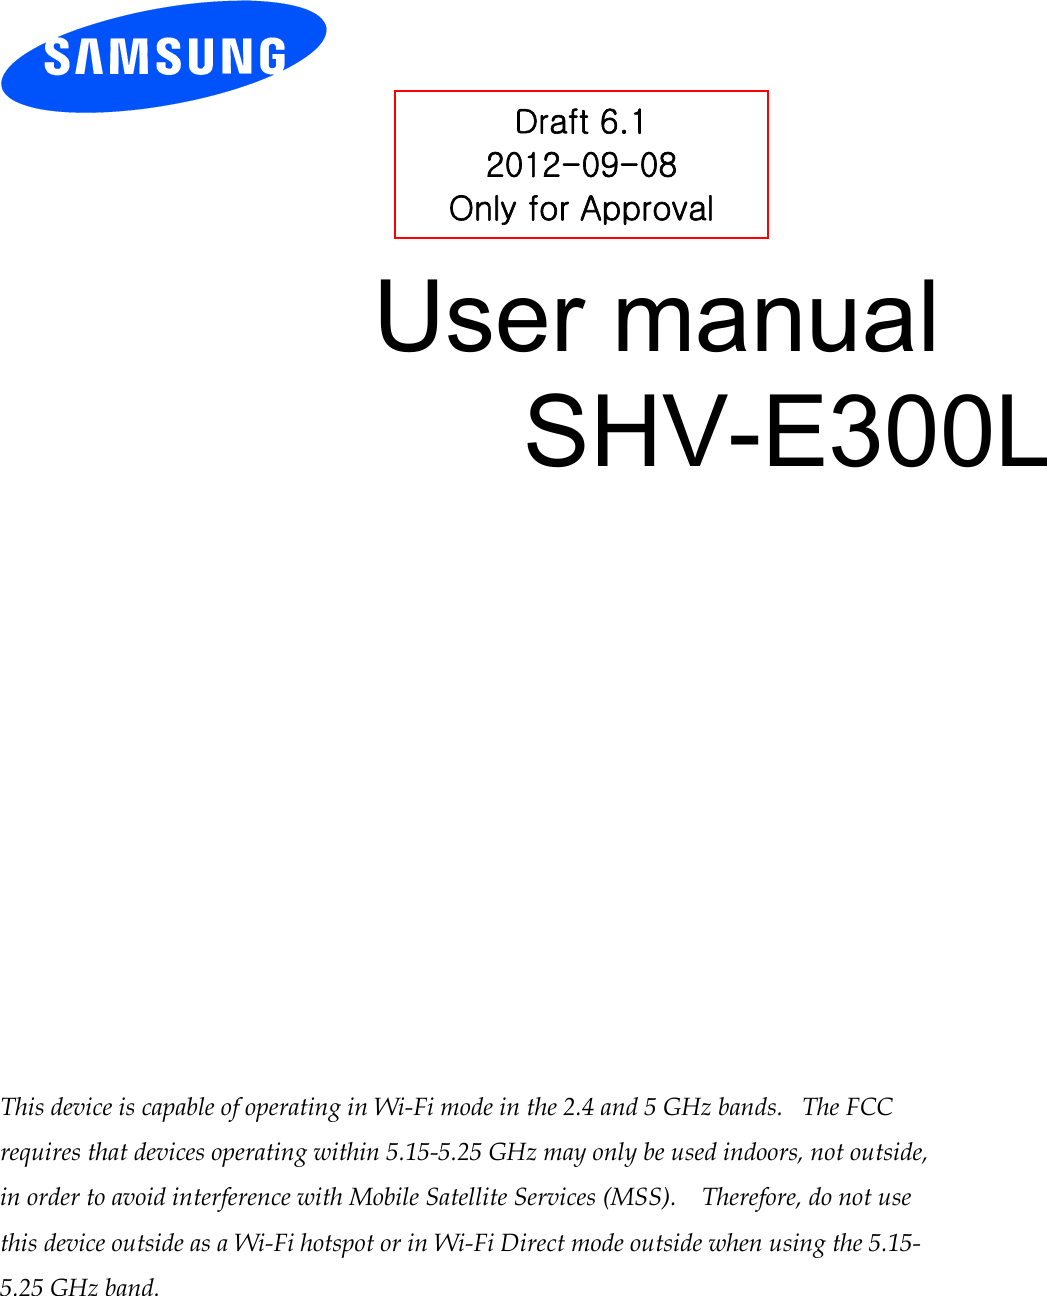          User manual SHV-E300L                 This device is capable of operating in Wi-Fi mode in the 2.4 and 5 GHz bands.   The FCC requires that devices operating within 5.15-5.25 GHz may only be used indoors, not outside, in order to avoid interference with Mobile Satellite Services (MSS).    Therefore, do not use this device outside as a Wi-Fi hotspot or in Wi-Fi Direct mode outside when using the 5.15-5.25 GHz band.  Draft 6.1 2012-09-08 Only for Approval 